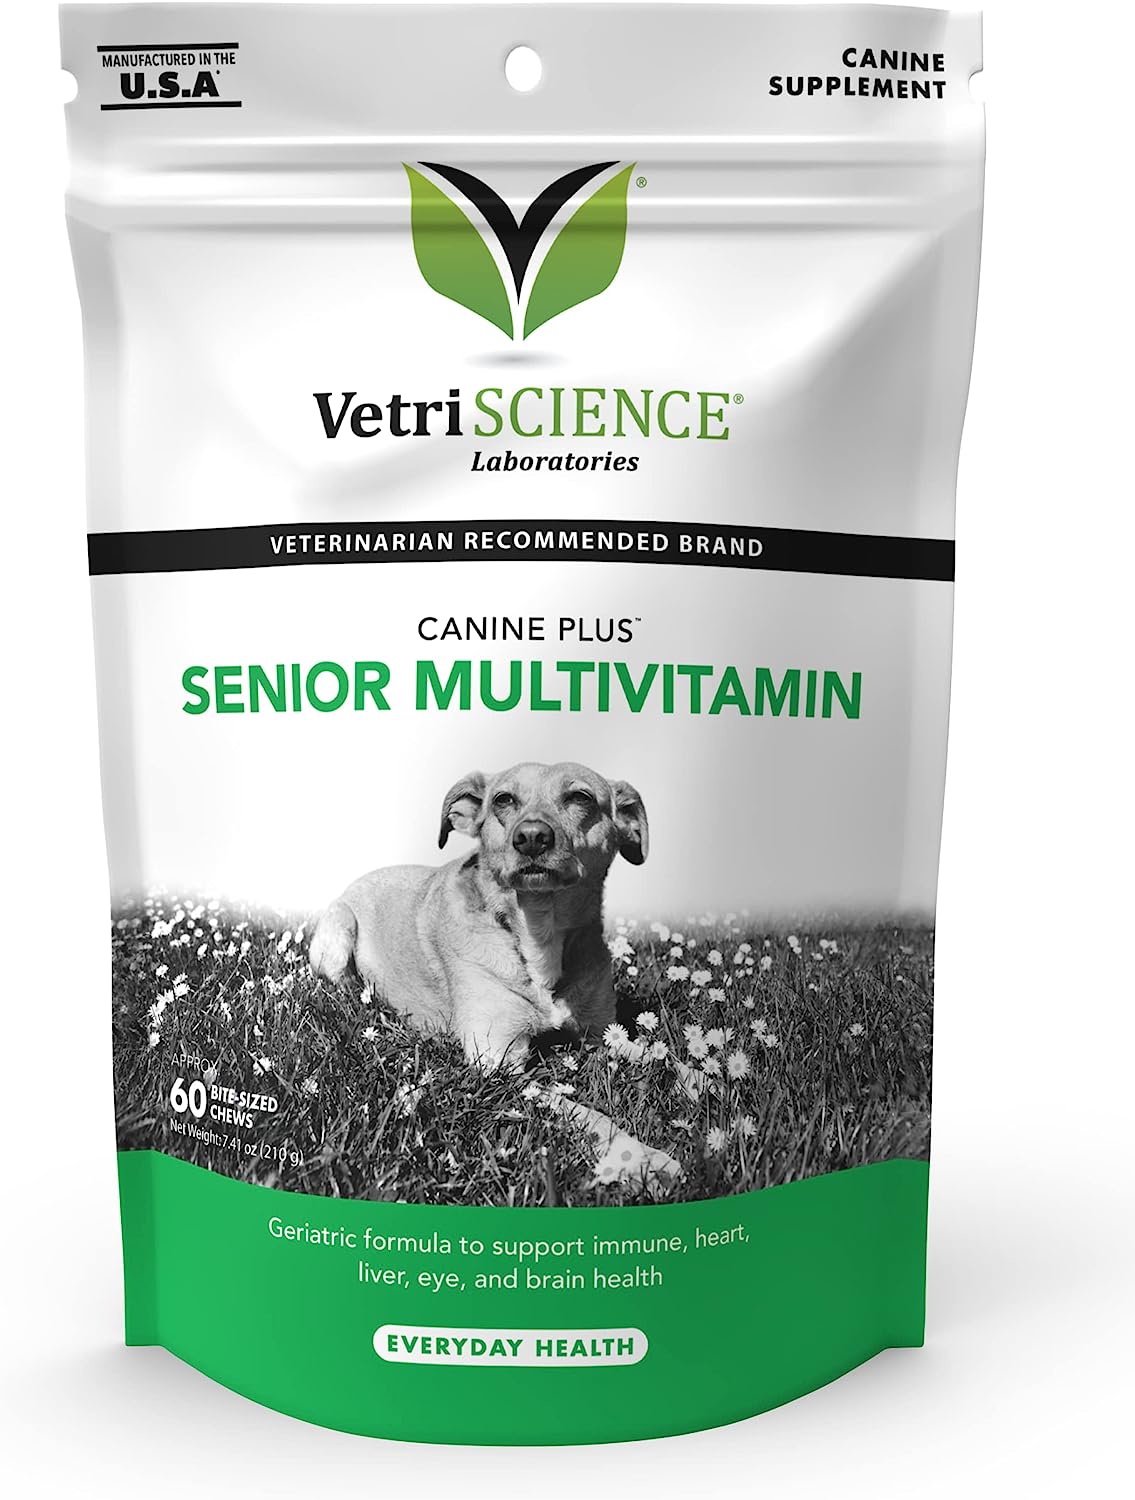 VETRISCIENCE Canine Plus MultiVitamin for Senior Dogs - Vet Recommended Vitamin Supplement - Supports Mood, Skin, Coat, Liver Function, 60 Chews (Packaging May Vary) : Pet Supplies